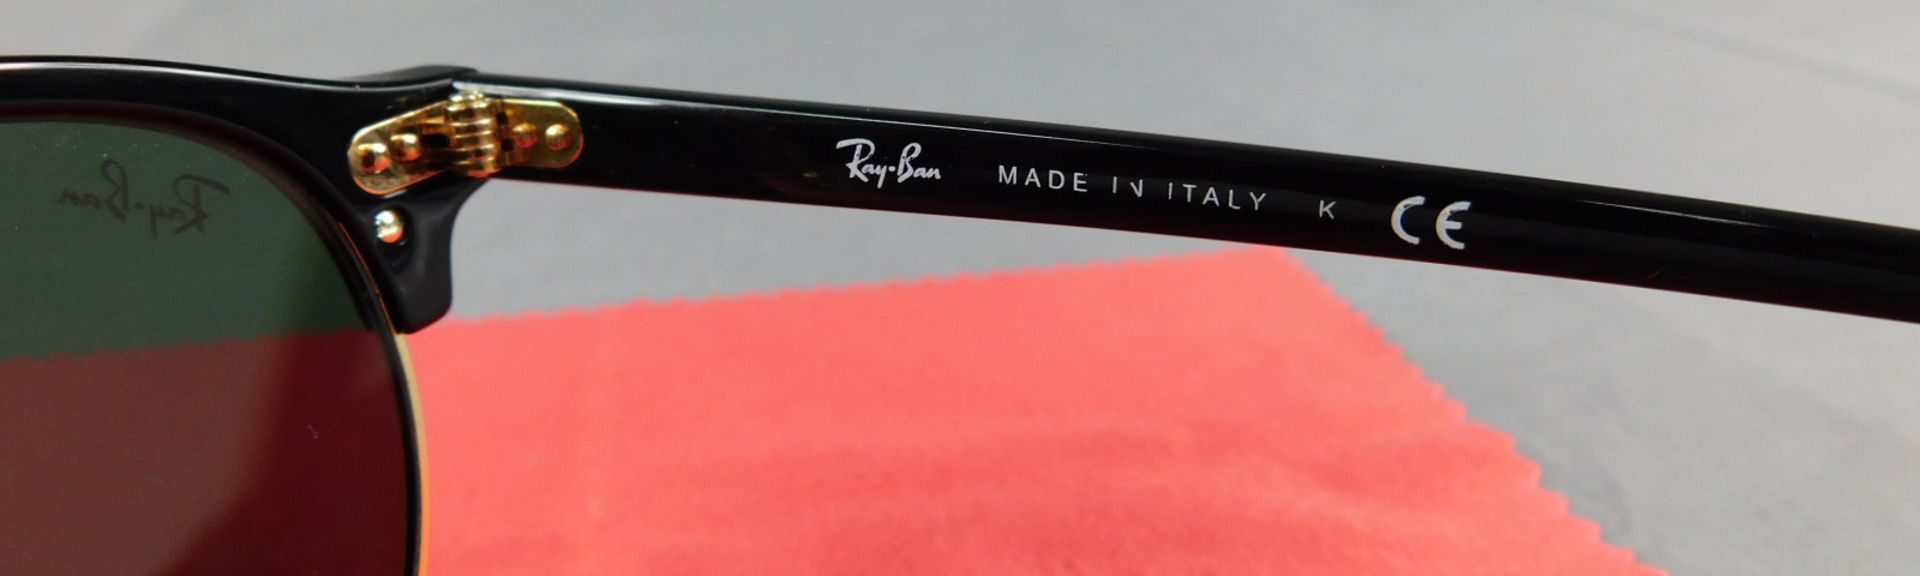 Ray Ban. Sonnenbrille. Clubmaster Classic. - Image 6 of 8